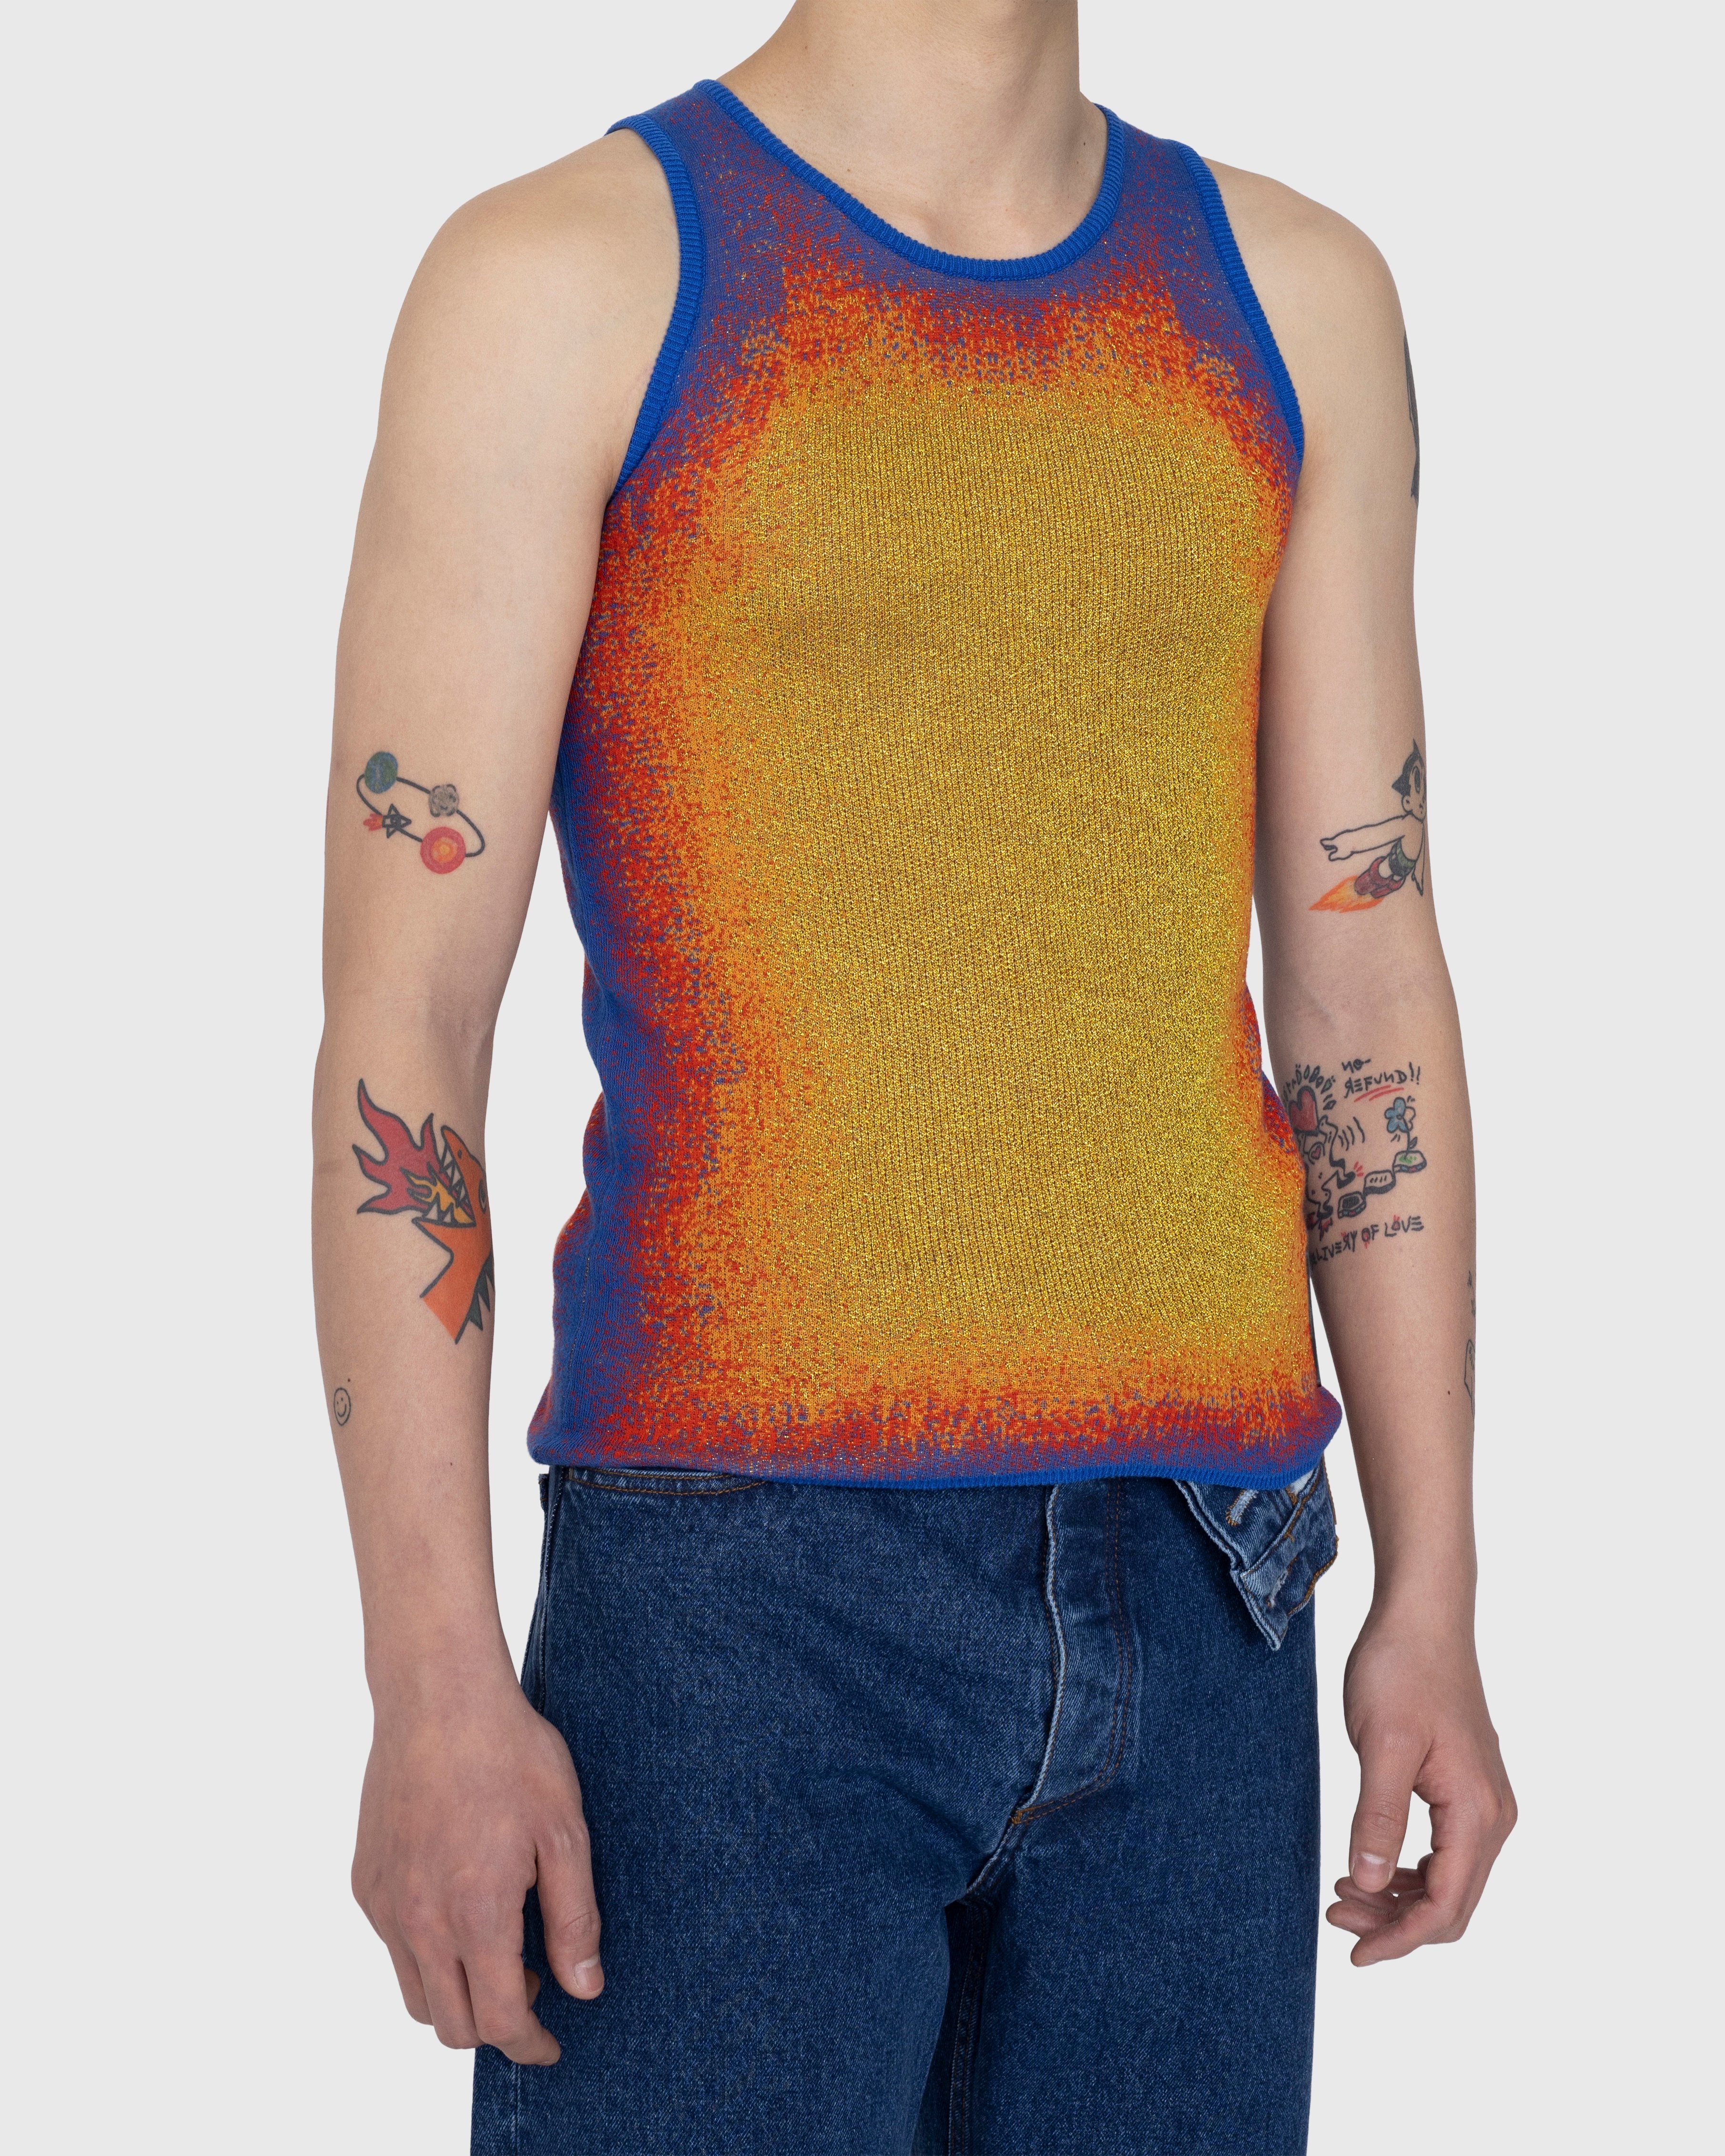 Y/Project - Gradient Knit Tanktop - Clothing - Multi - Image 4